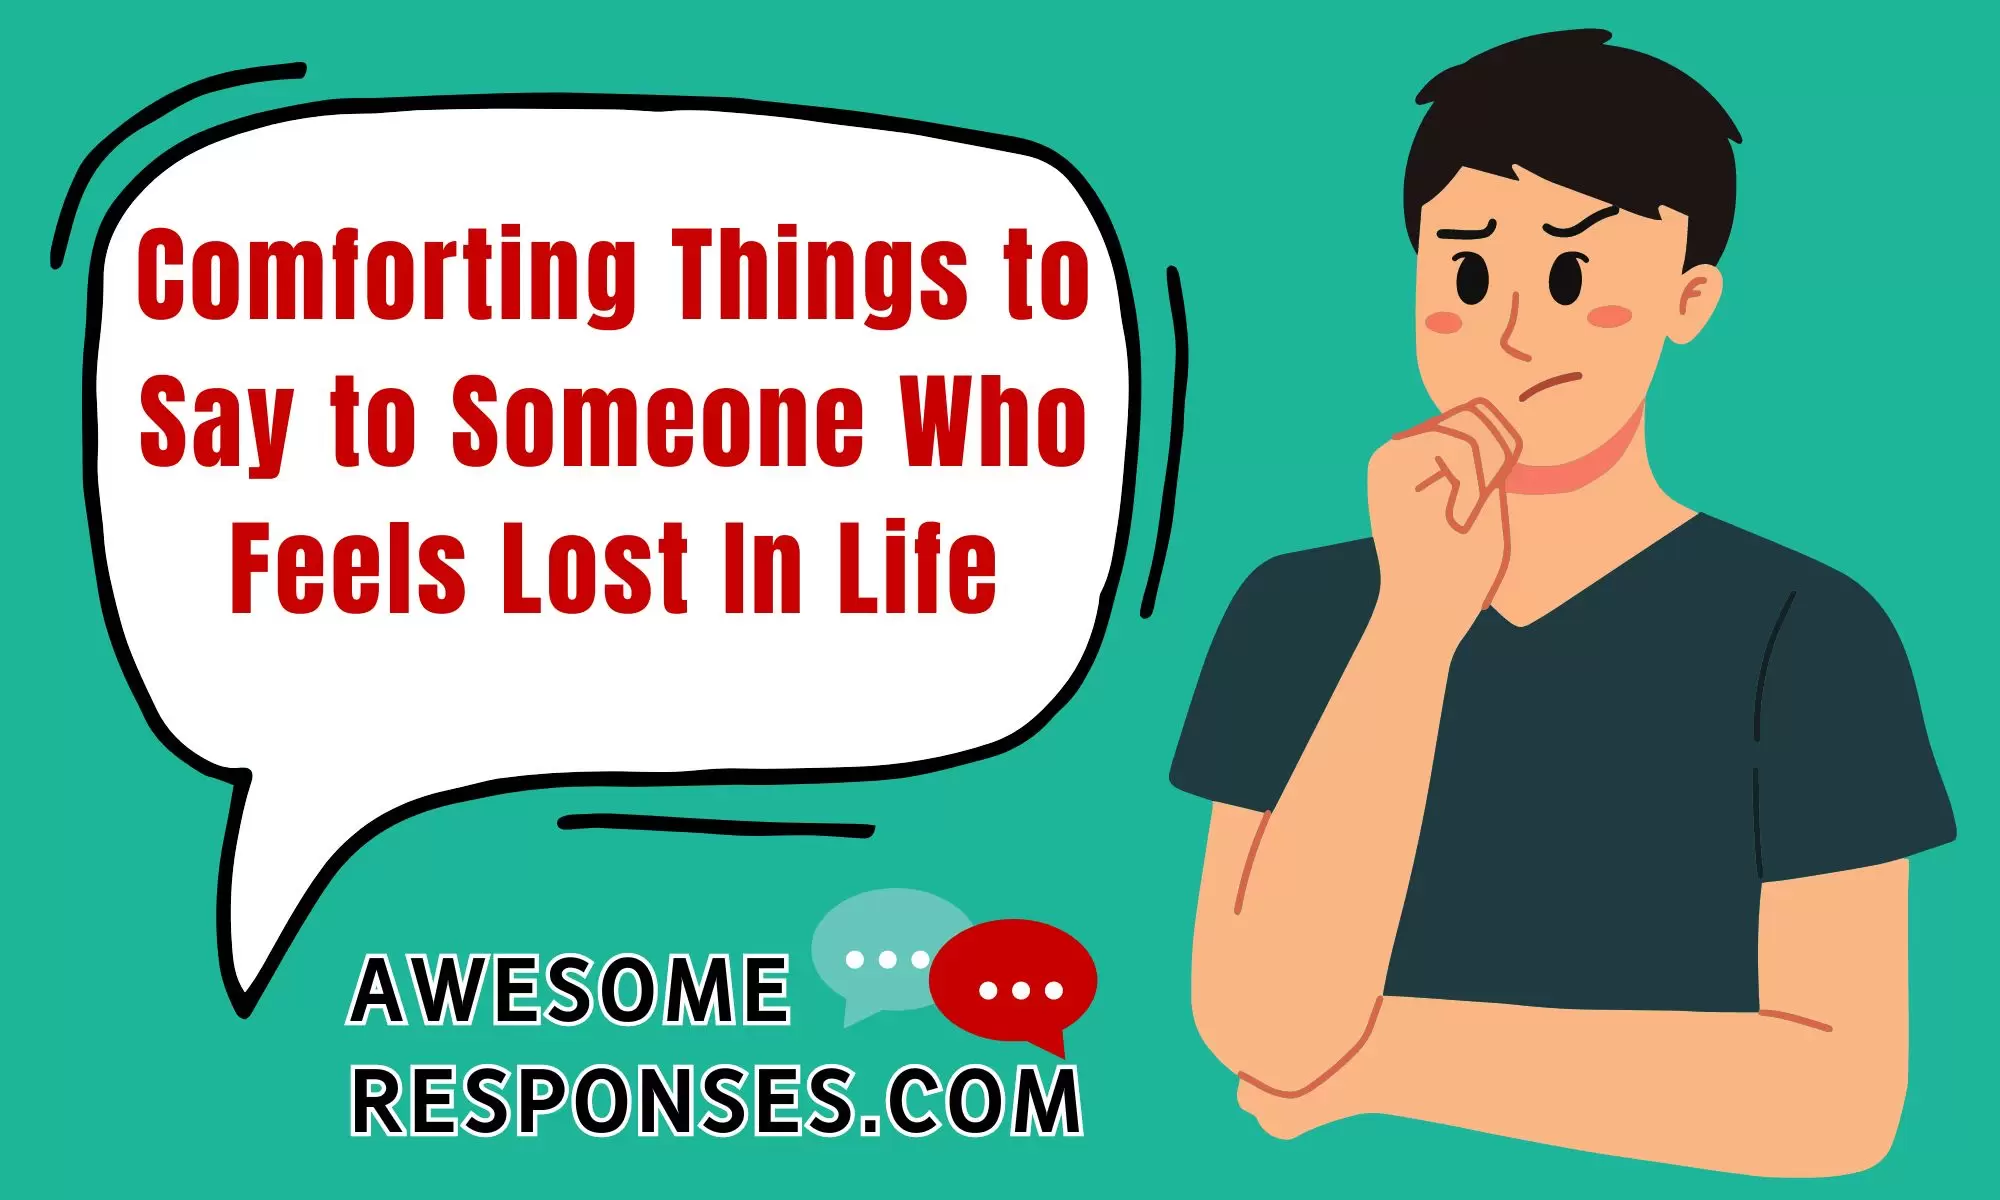 omforting Things to Say to Someone Who Feels Lost In Life